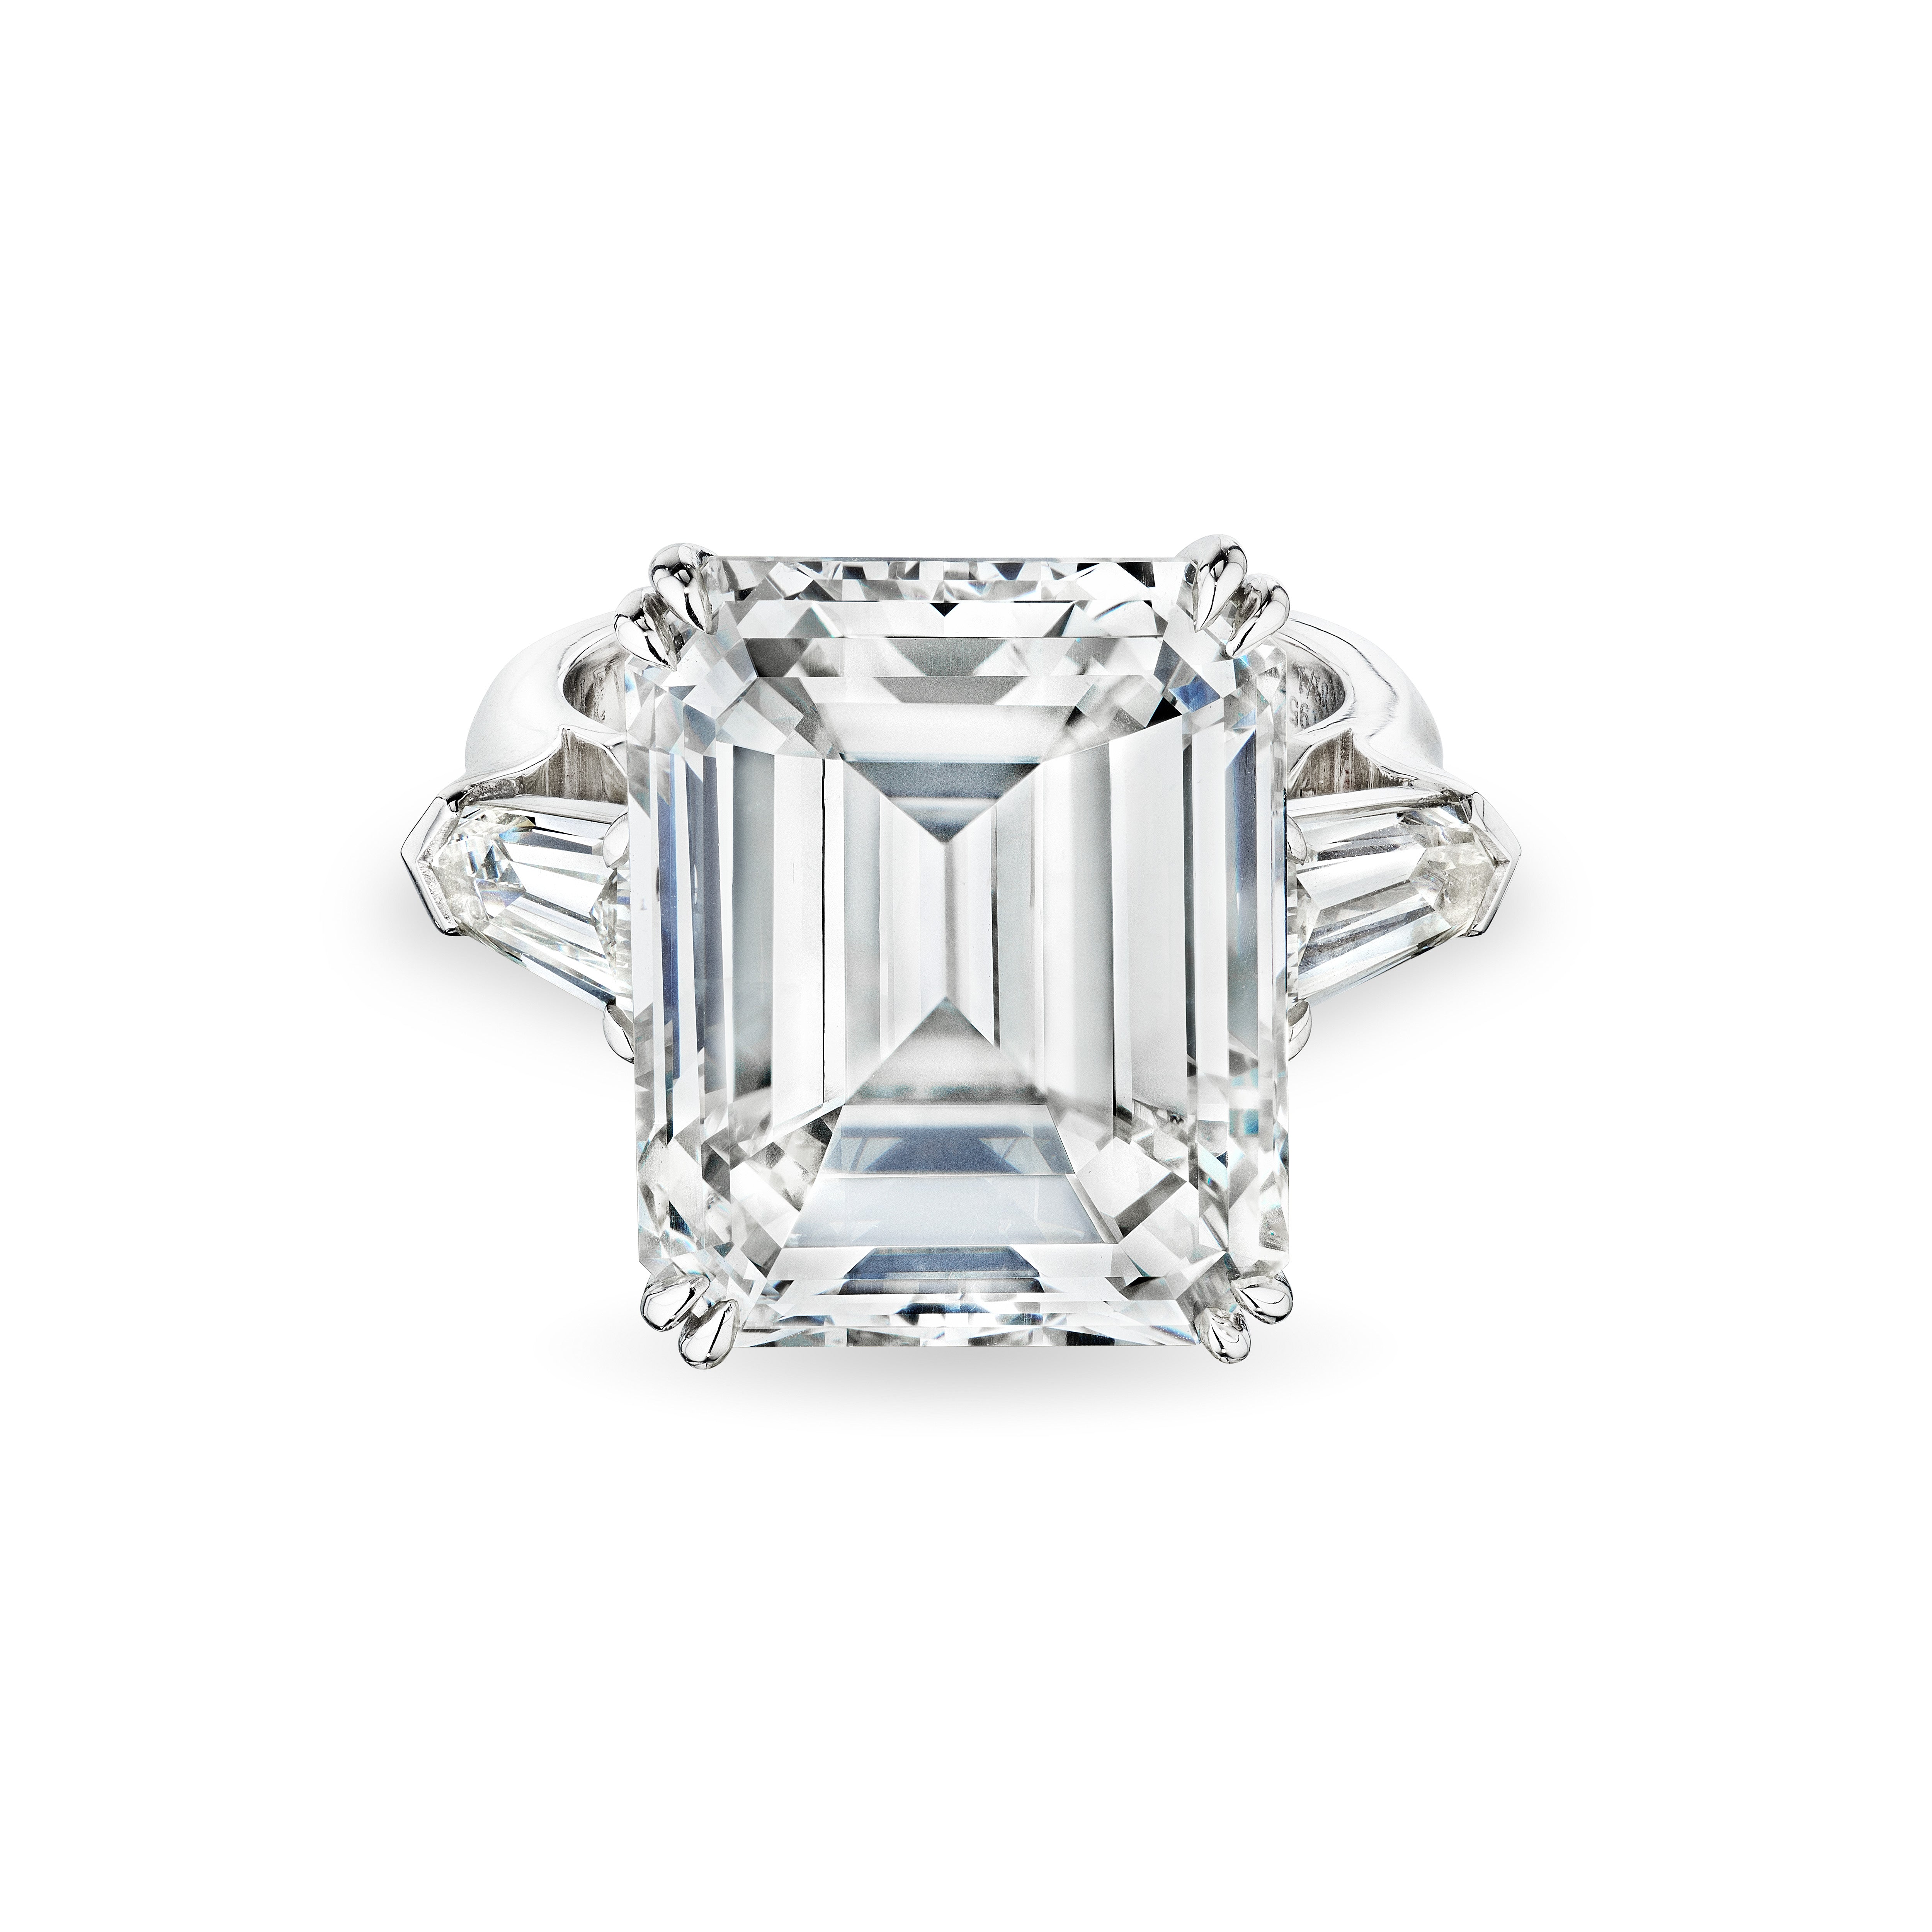 Emerald Cut Diamond Ring with Tapered Baguettes, 18.93 CT - Rings - Leviev Diamonds